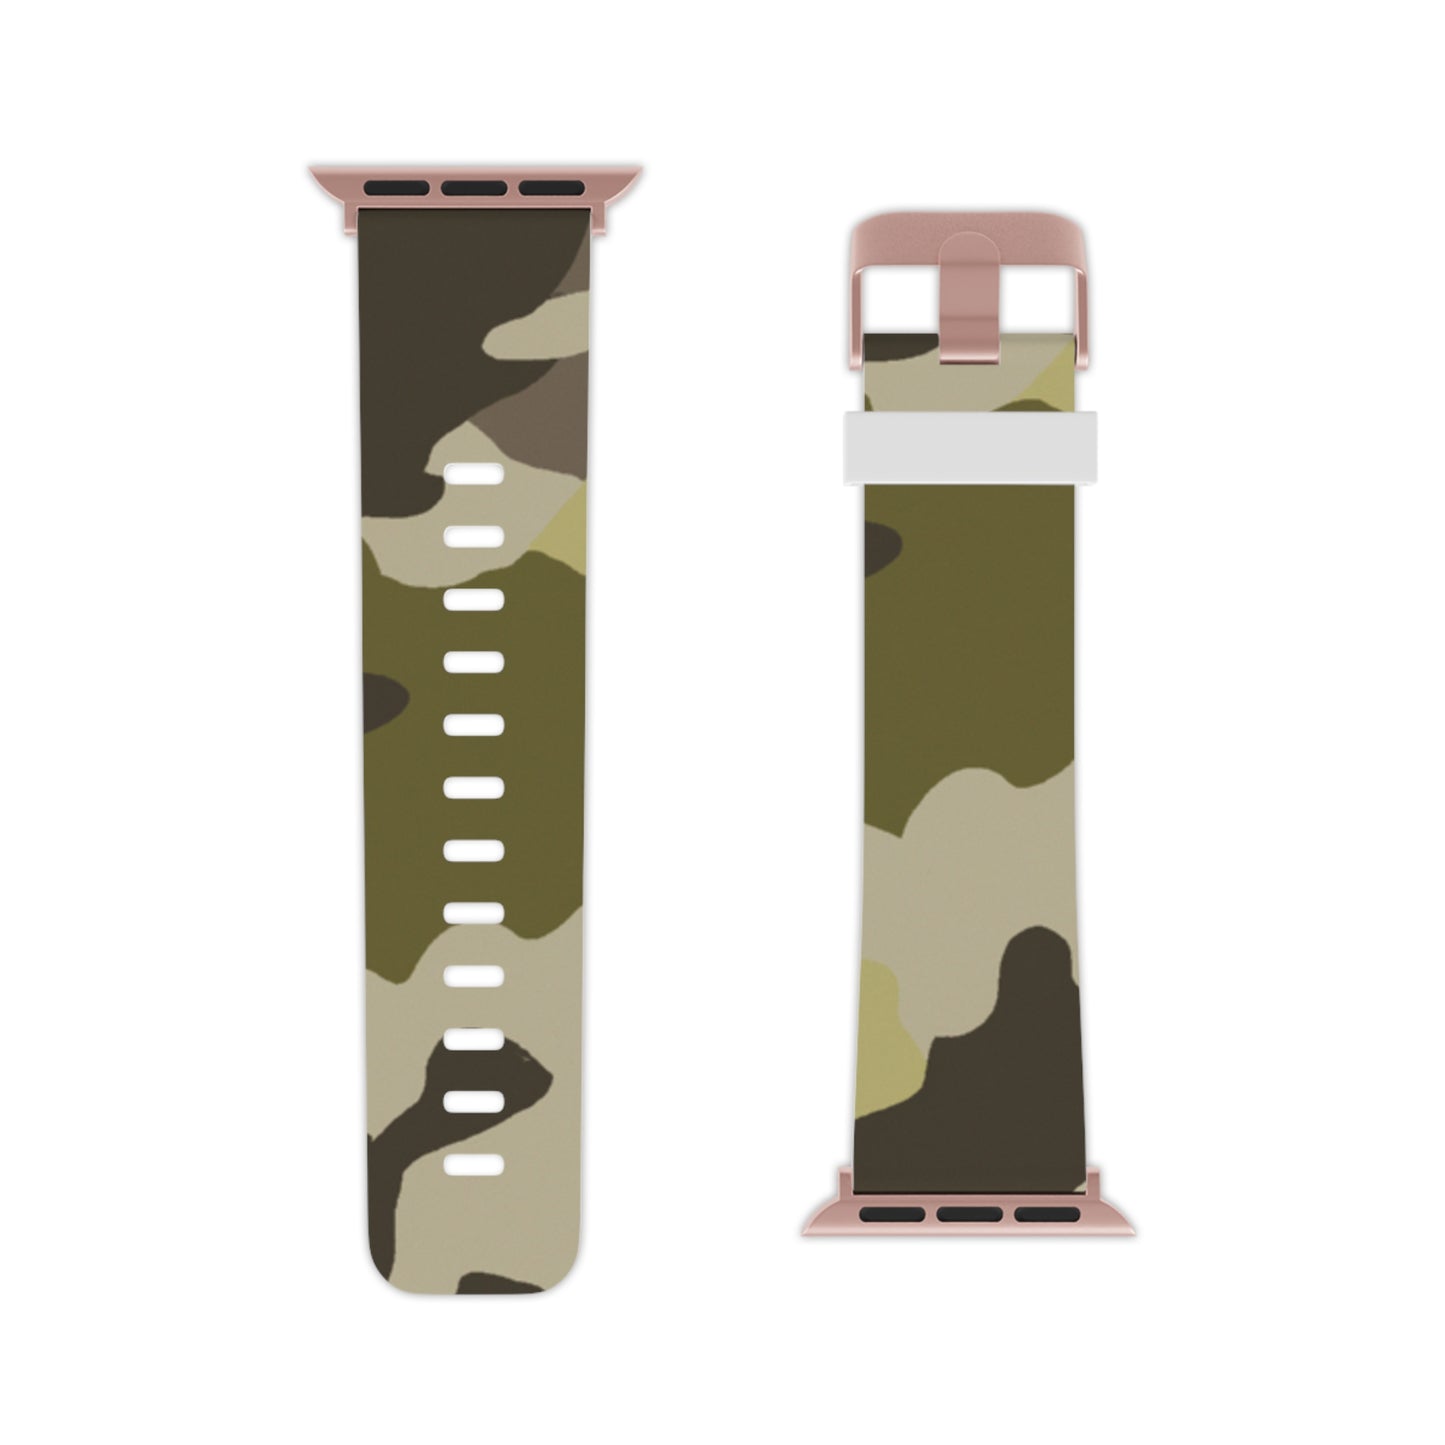 Charles Finley Smith - Camouflage Apple Wrist Watch Band